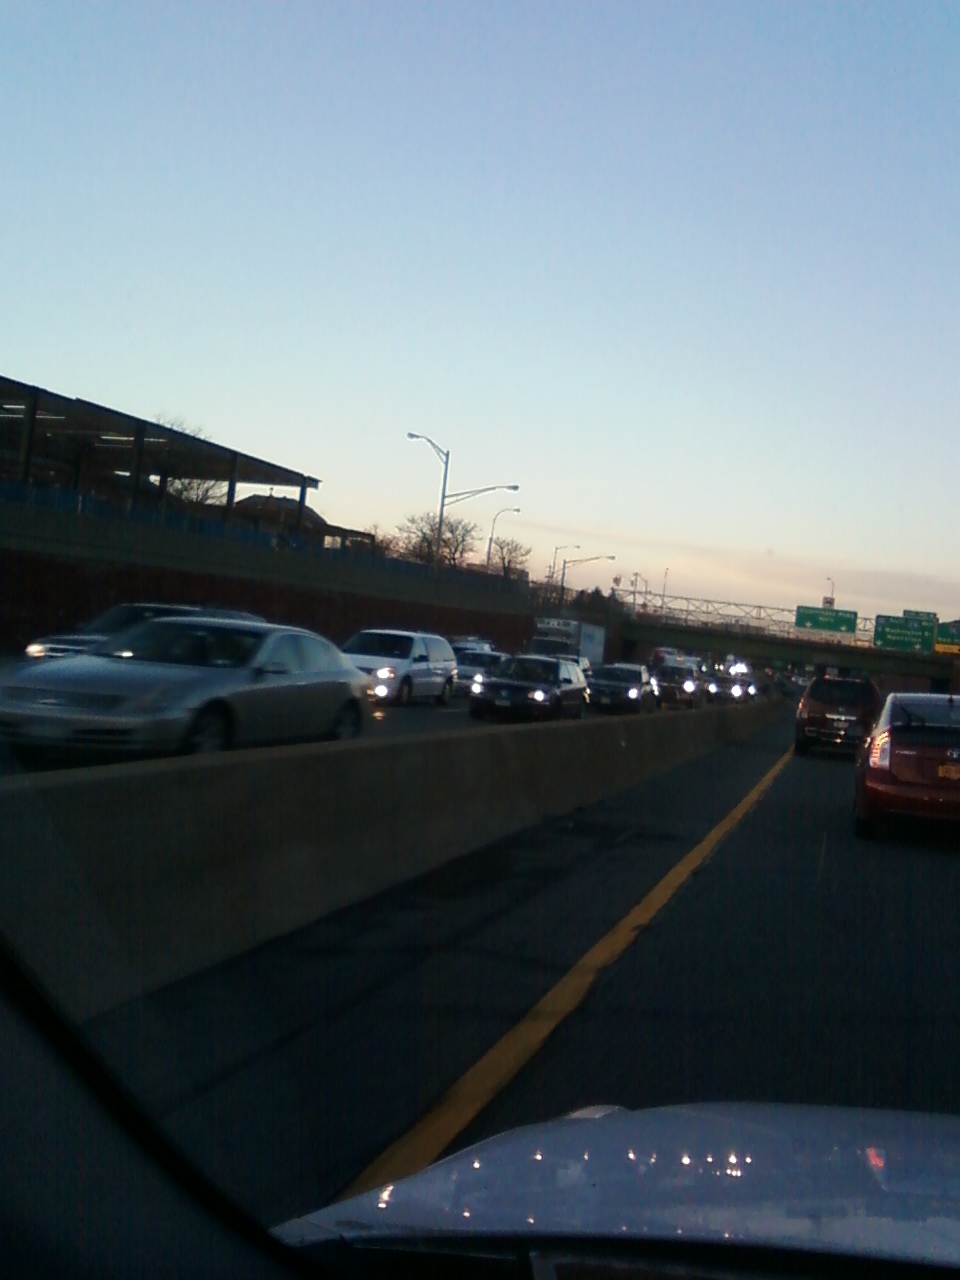 12/28/2012- Traffic is backed up while approaching the Whitestone Bridge. Further details are available at http://www.wirelessnotes.org/tolls/